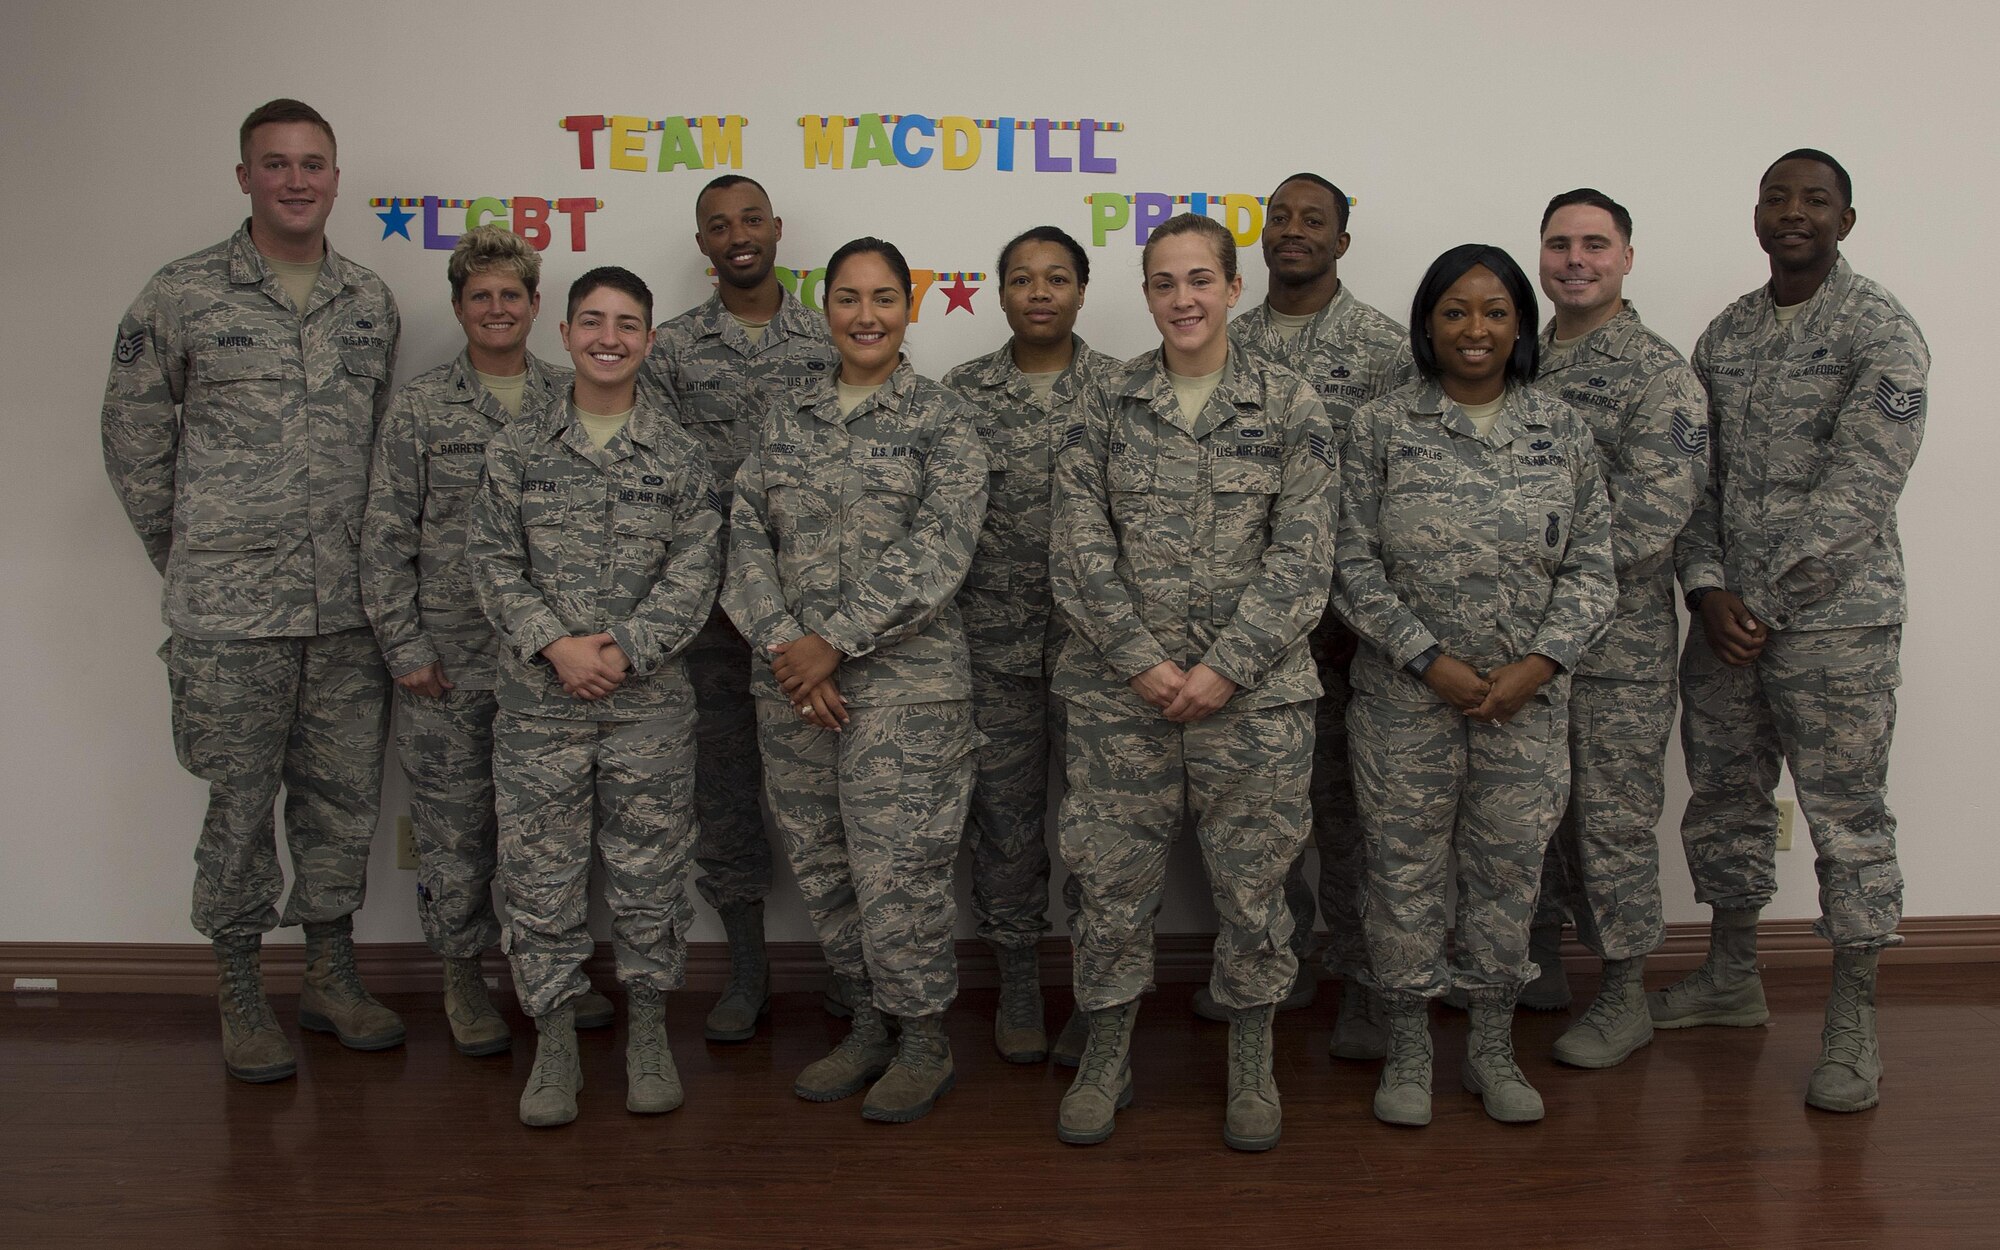 Members of MacDill’s Pride Committee and panel participants pause for a photo at the close of the Pride Luncheon at MacDill Air Force Base, Fla., June 15, 2017. The purpose of Pride Month is to recognize the impact lesbian, gay, bisexual and transgender service members and civilians have had on our nation. (U.S. Air Force Photo by Airman 1st Class Ashley Perdue)